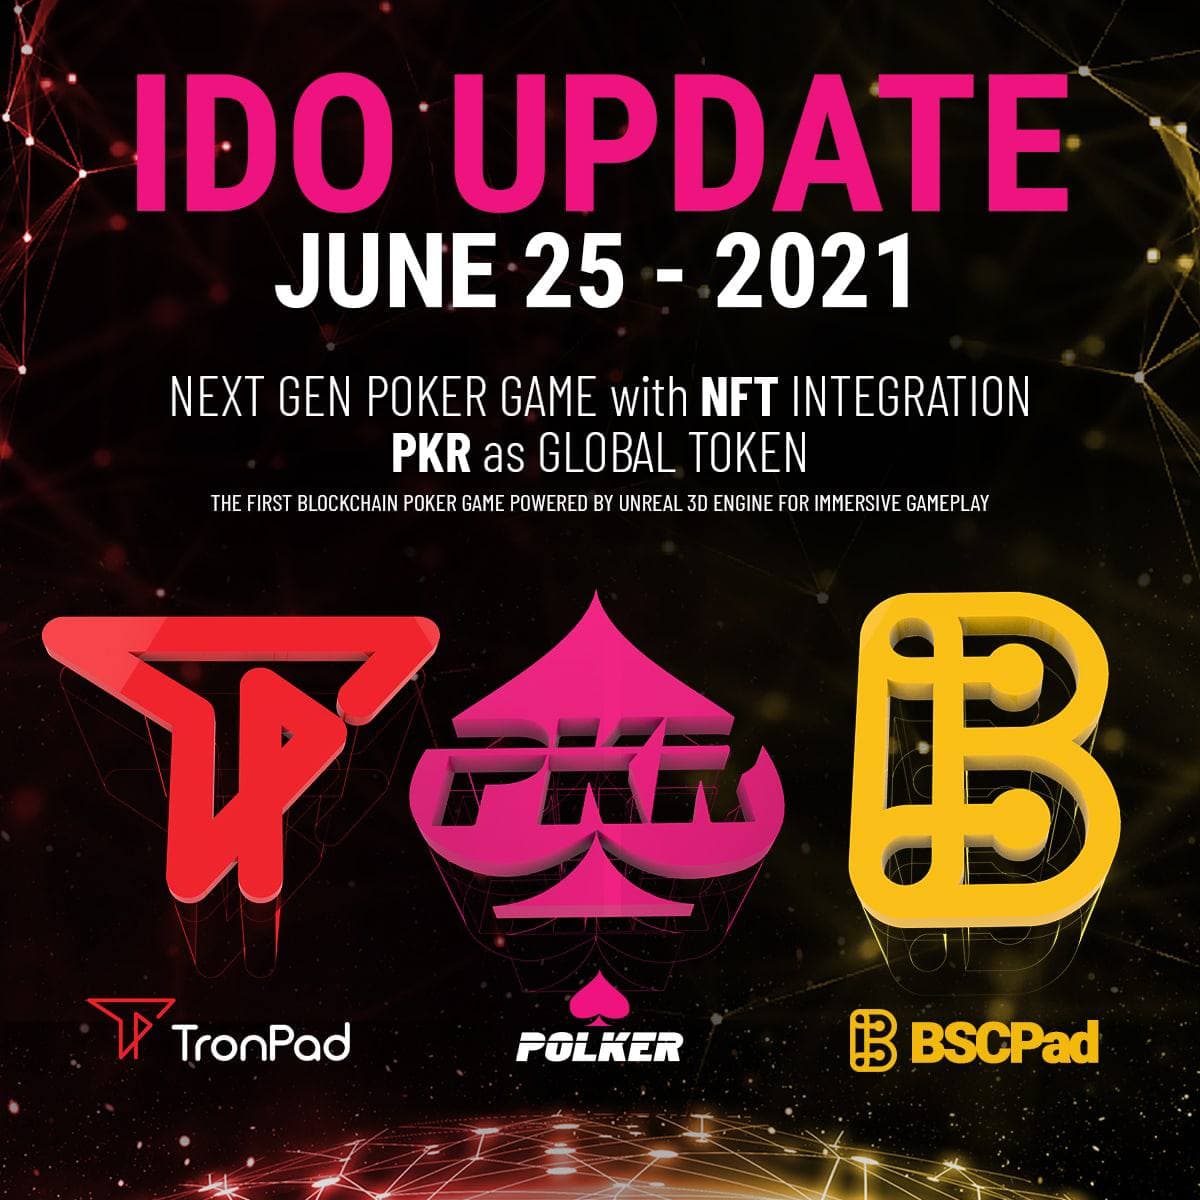 Tronpad Polker Pkr Ido Is Now Open Bscpad T Co Vuipub58ye Tronpad T Co Ddlzouwo26 If You Have Not Yet Completed Kyc Follow The Steps As Indicated In This Article Bscpad Kyc Guide T Co Ul6xyddpar